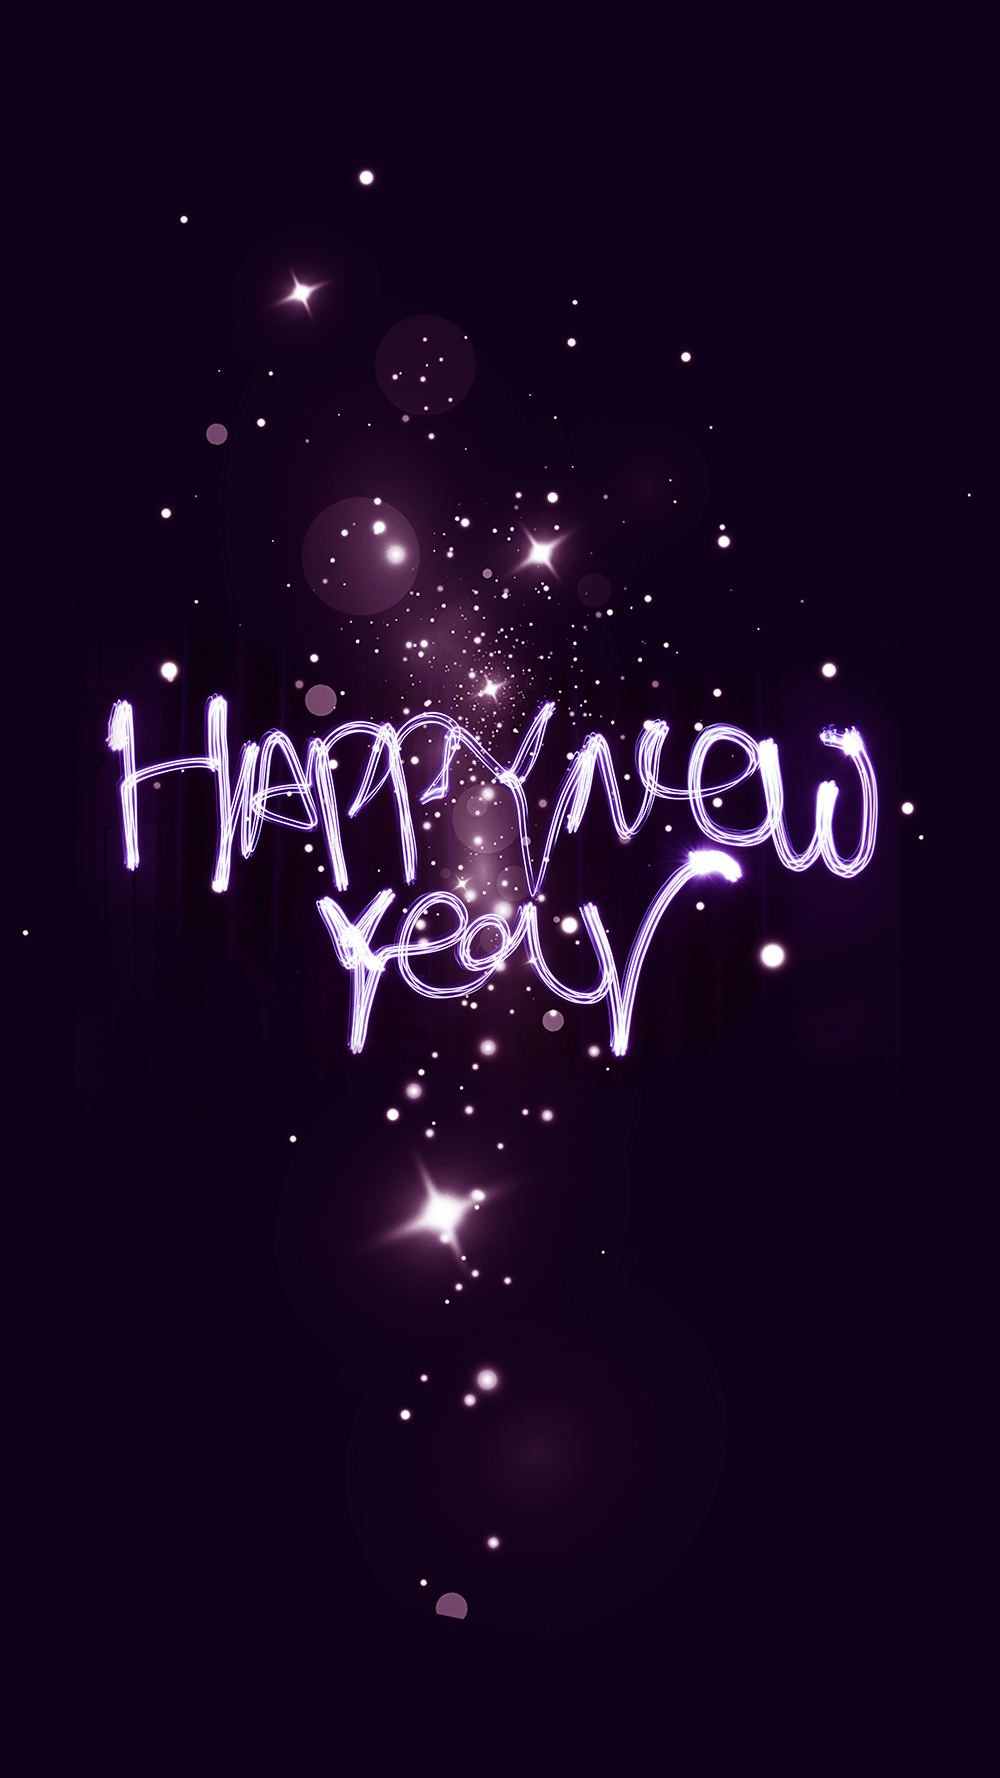 Happy New Year! Aesthetic New Year image for social media ♥ ⋆ The Aesthetic Shop